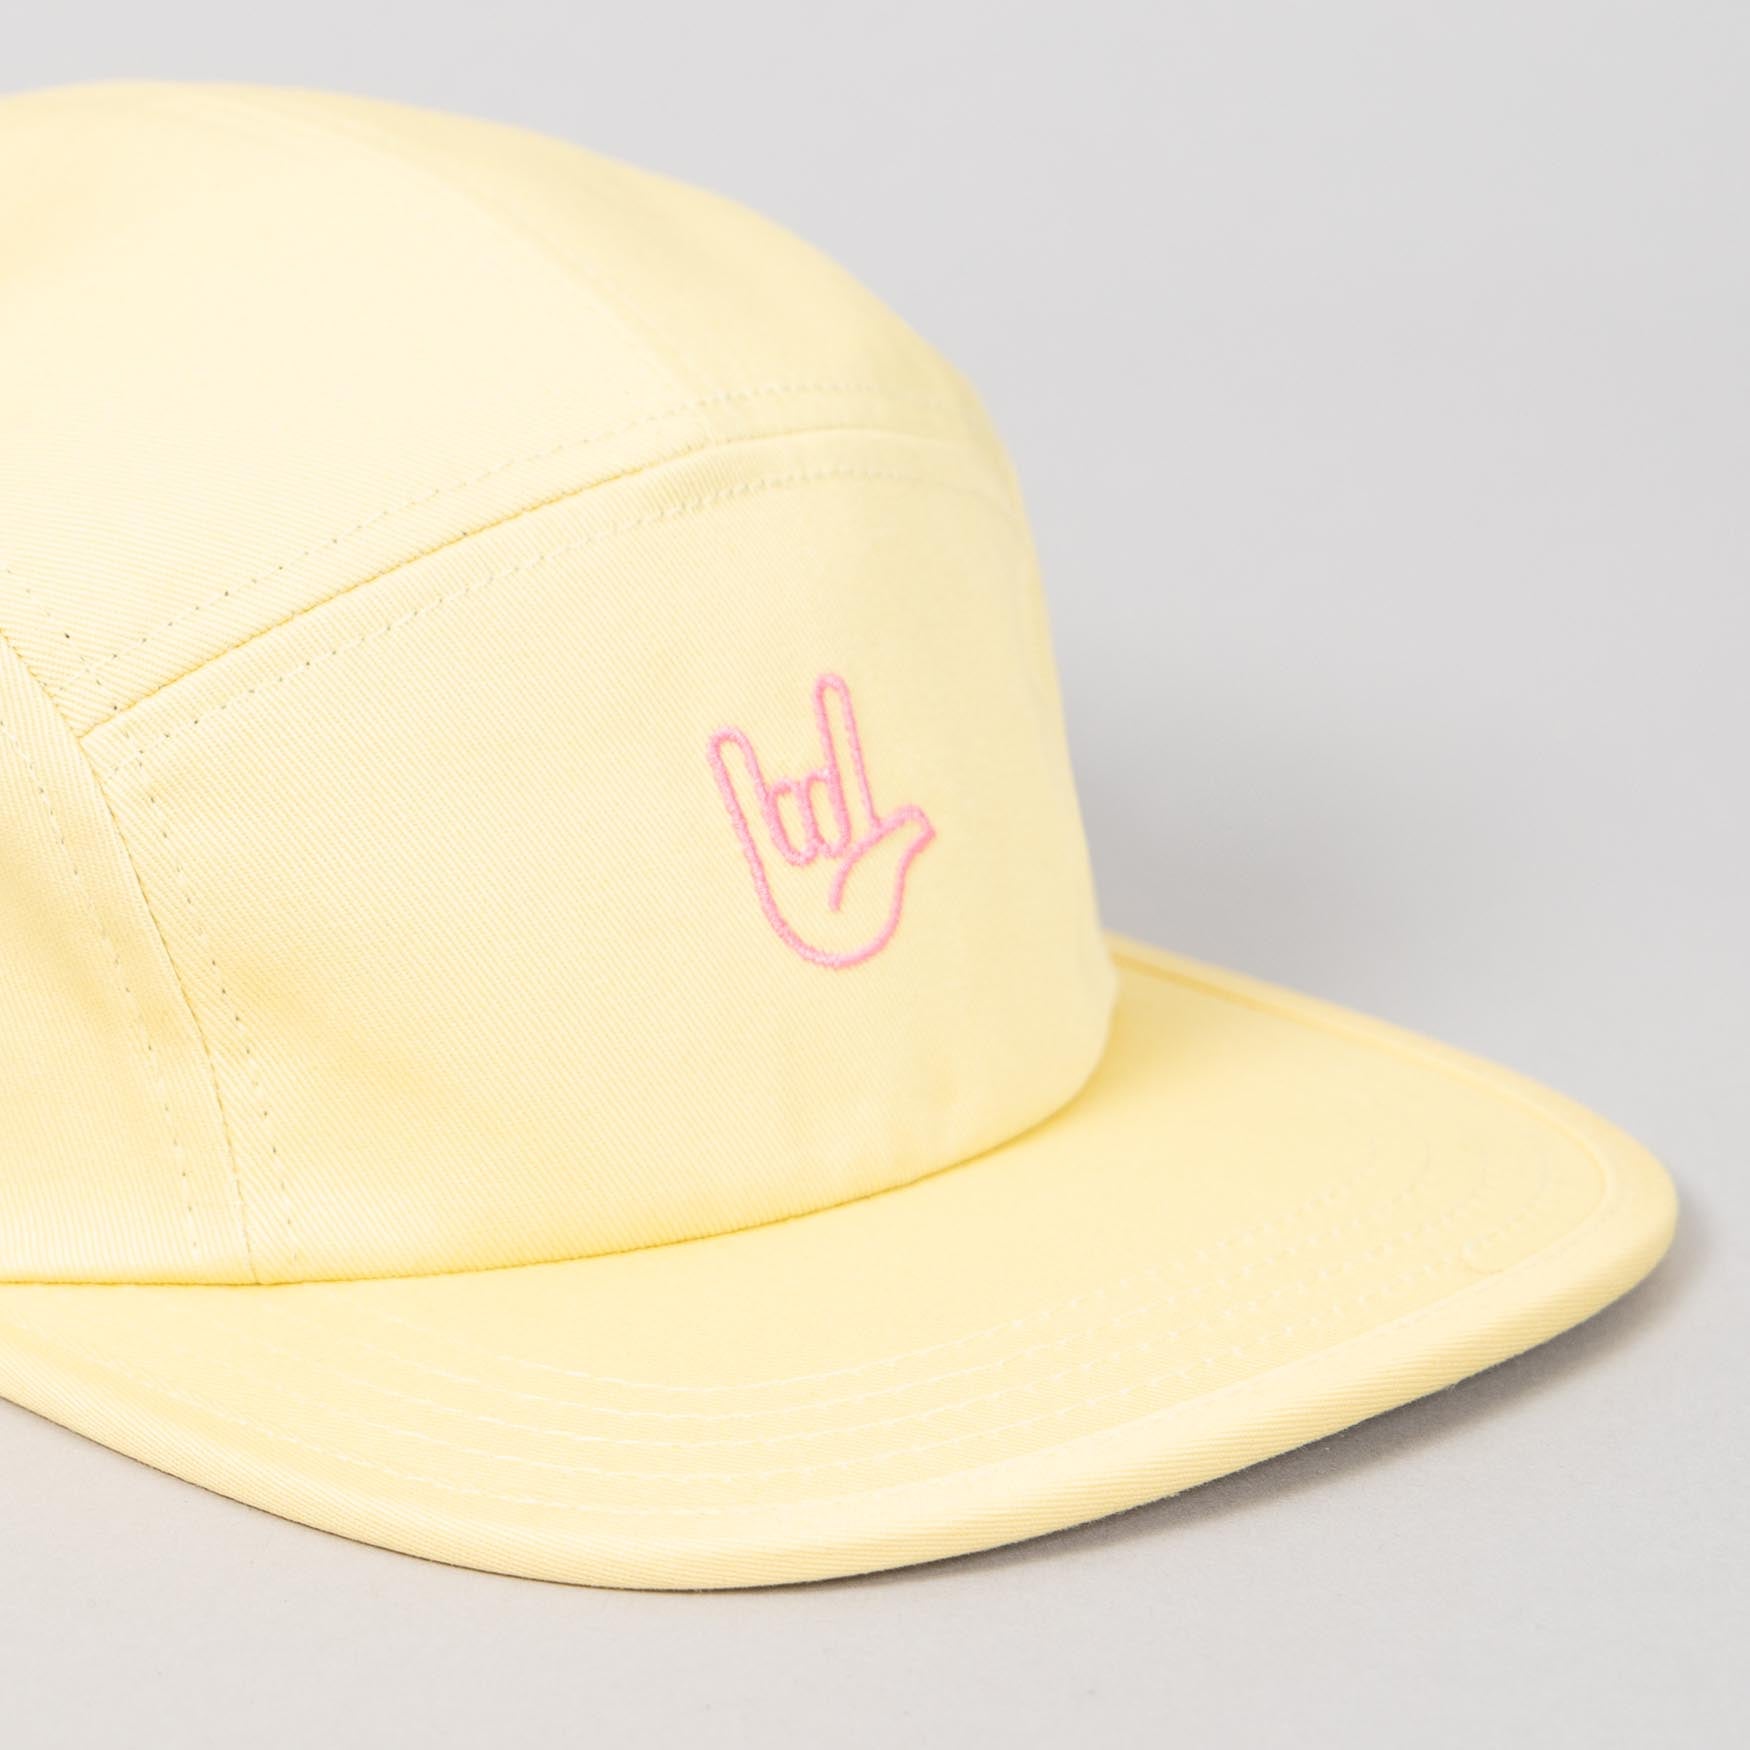 I Love You – Five Panel Cap Butter